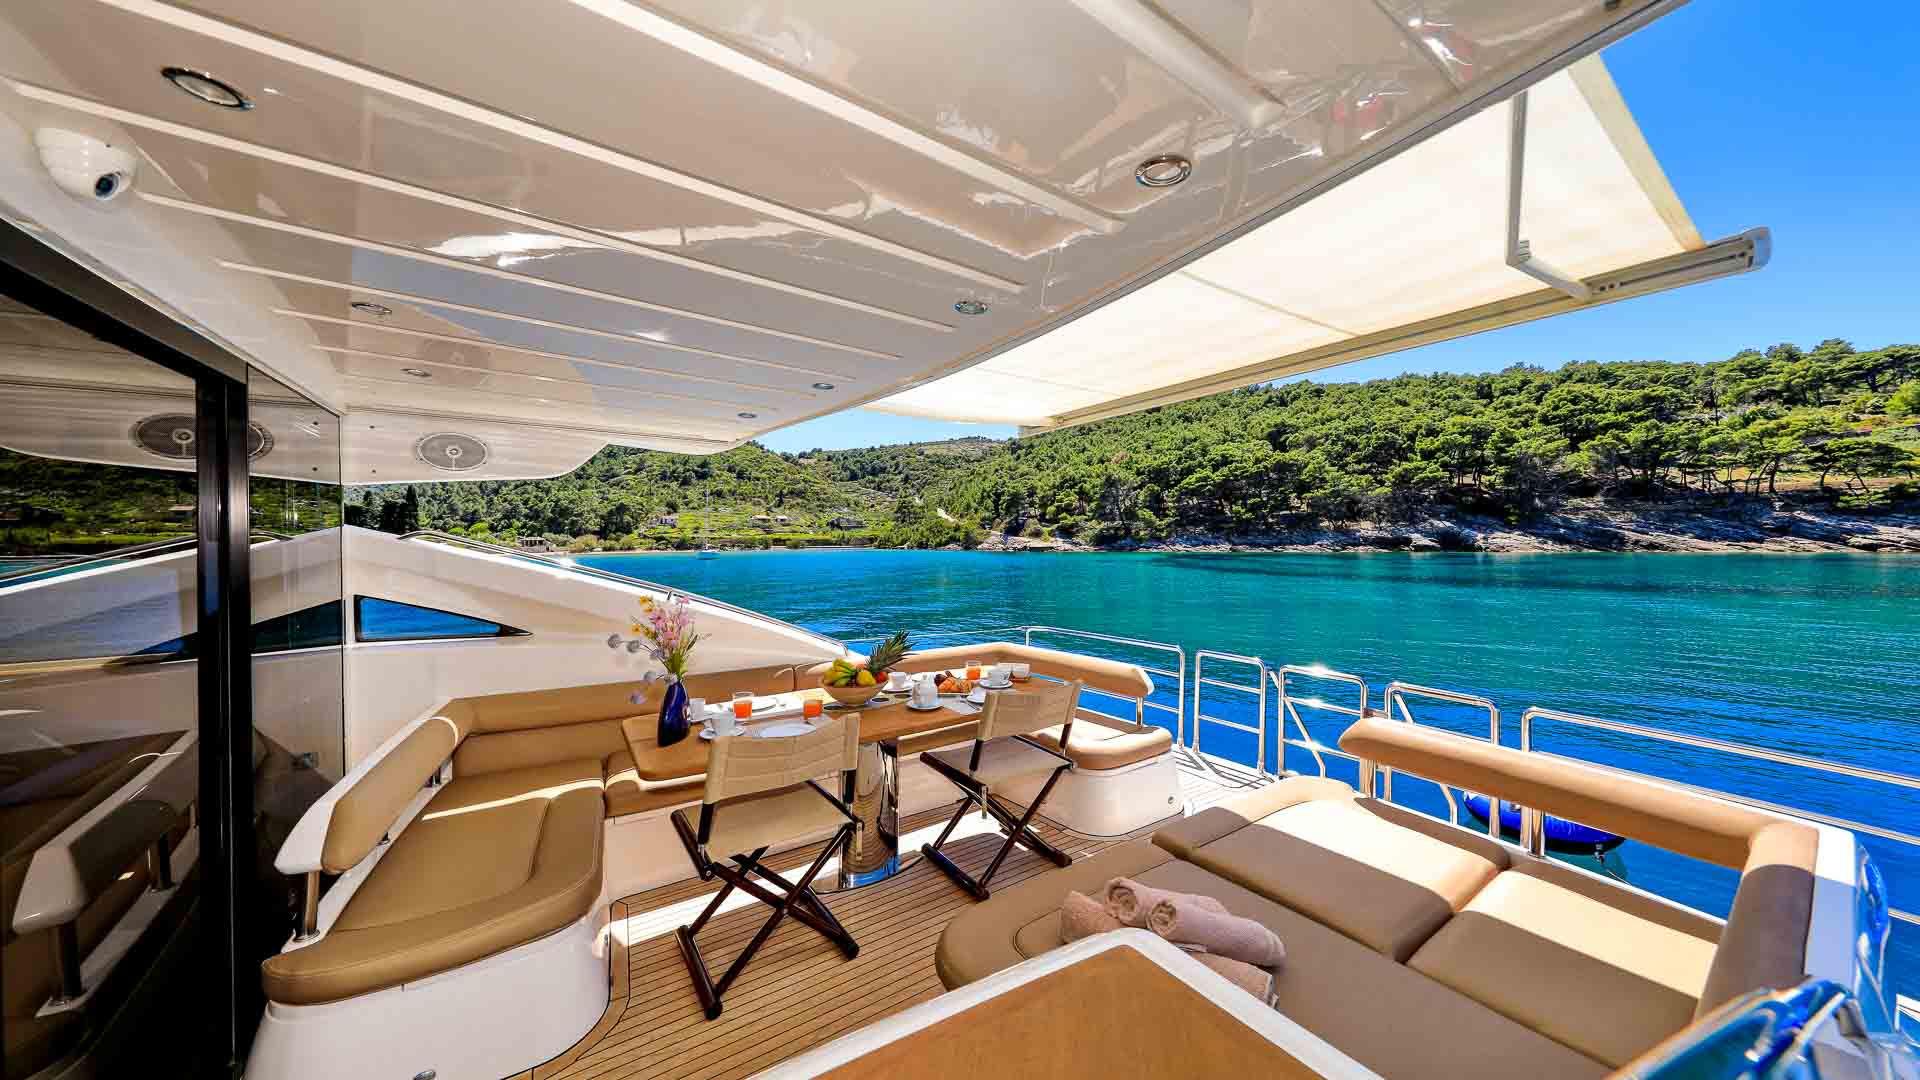 Aft Deck Seating And Sunbathing